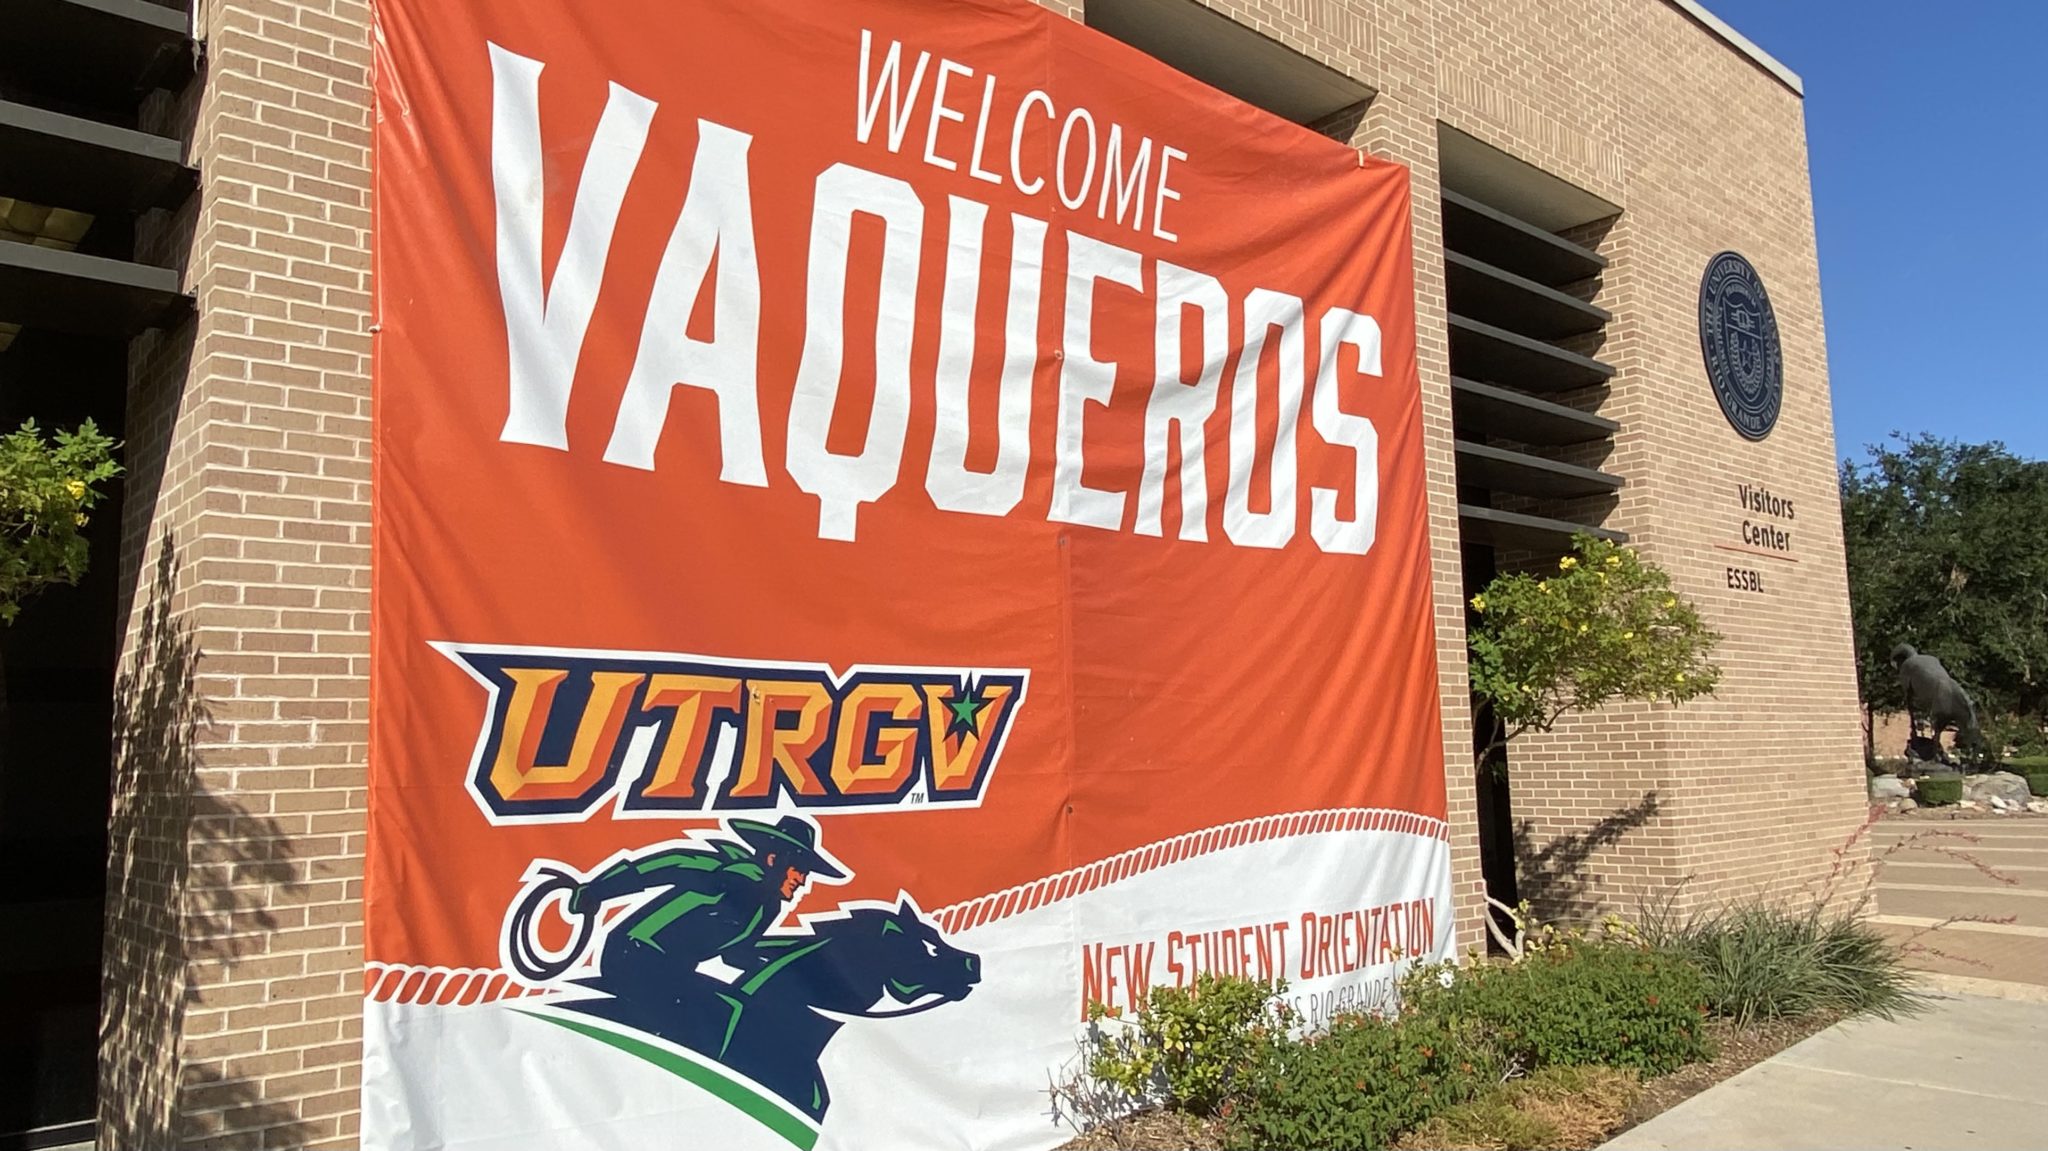 UTRGV continues to provide relief to students during the COVID19